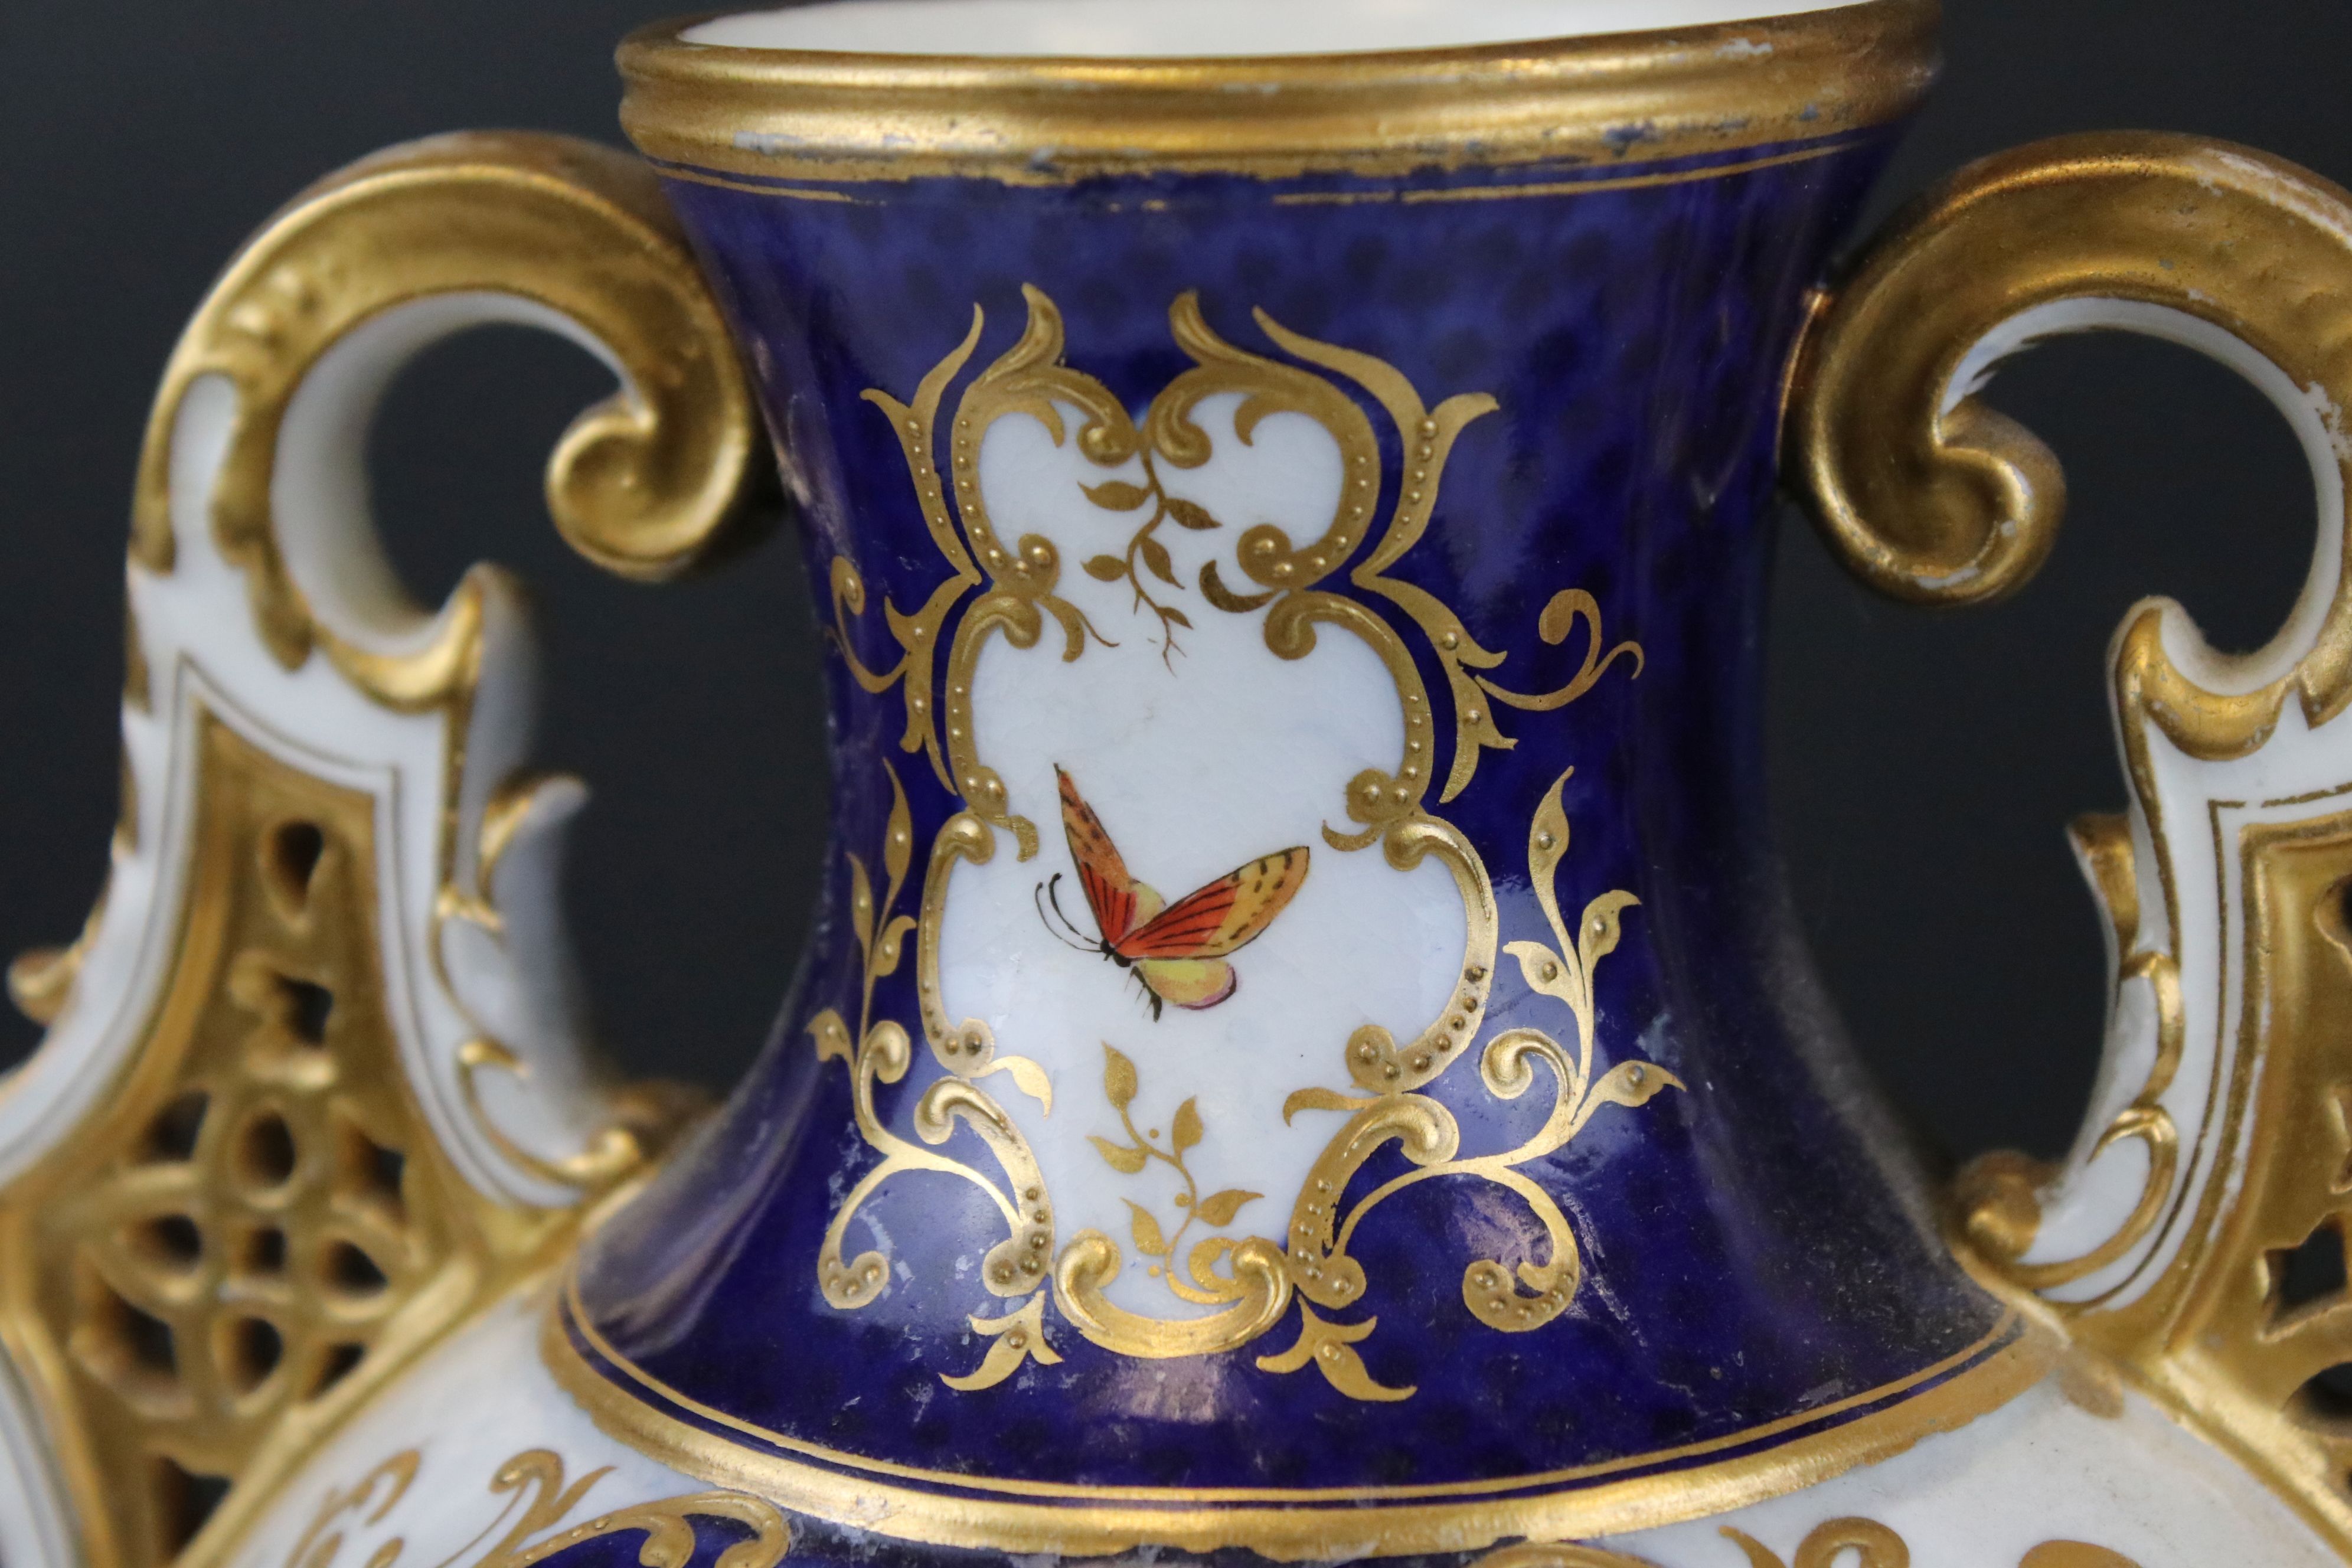 Early 20th century Coalport Twin Handled Vase, painted with panels of an exotic birds, floral sprays - Image 8 of 10